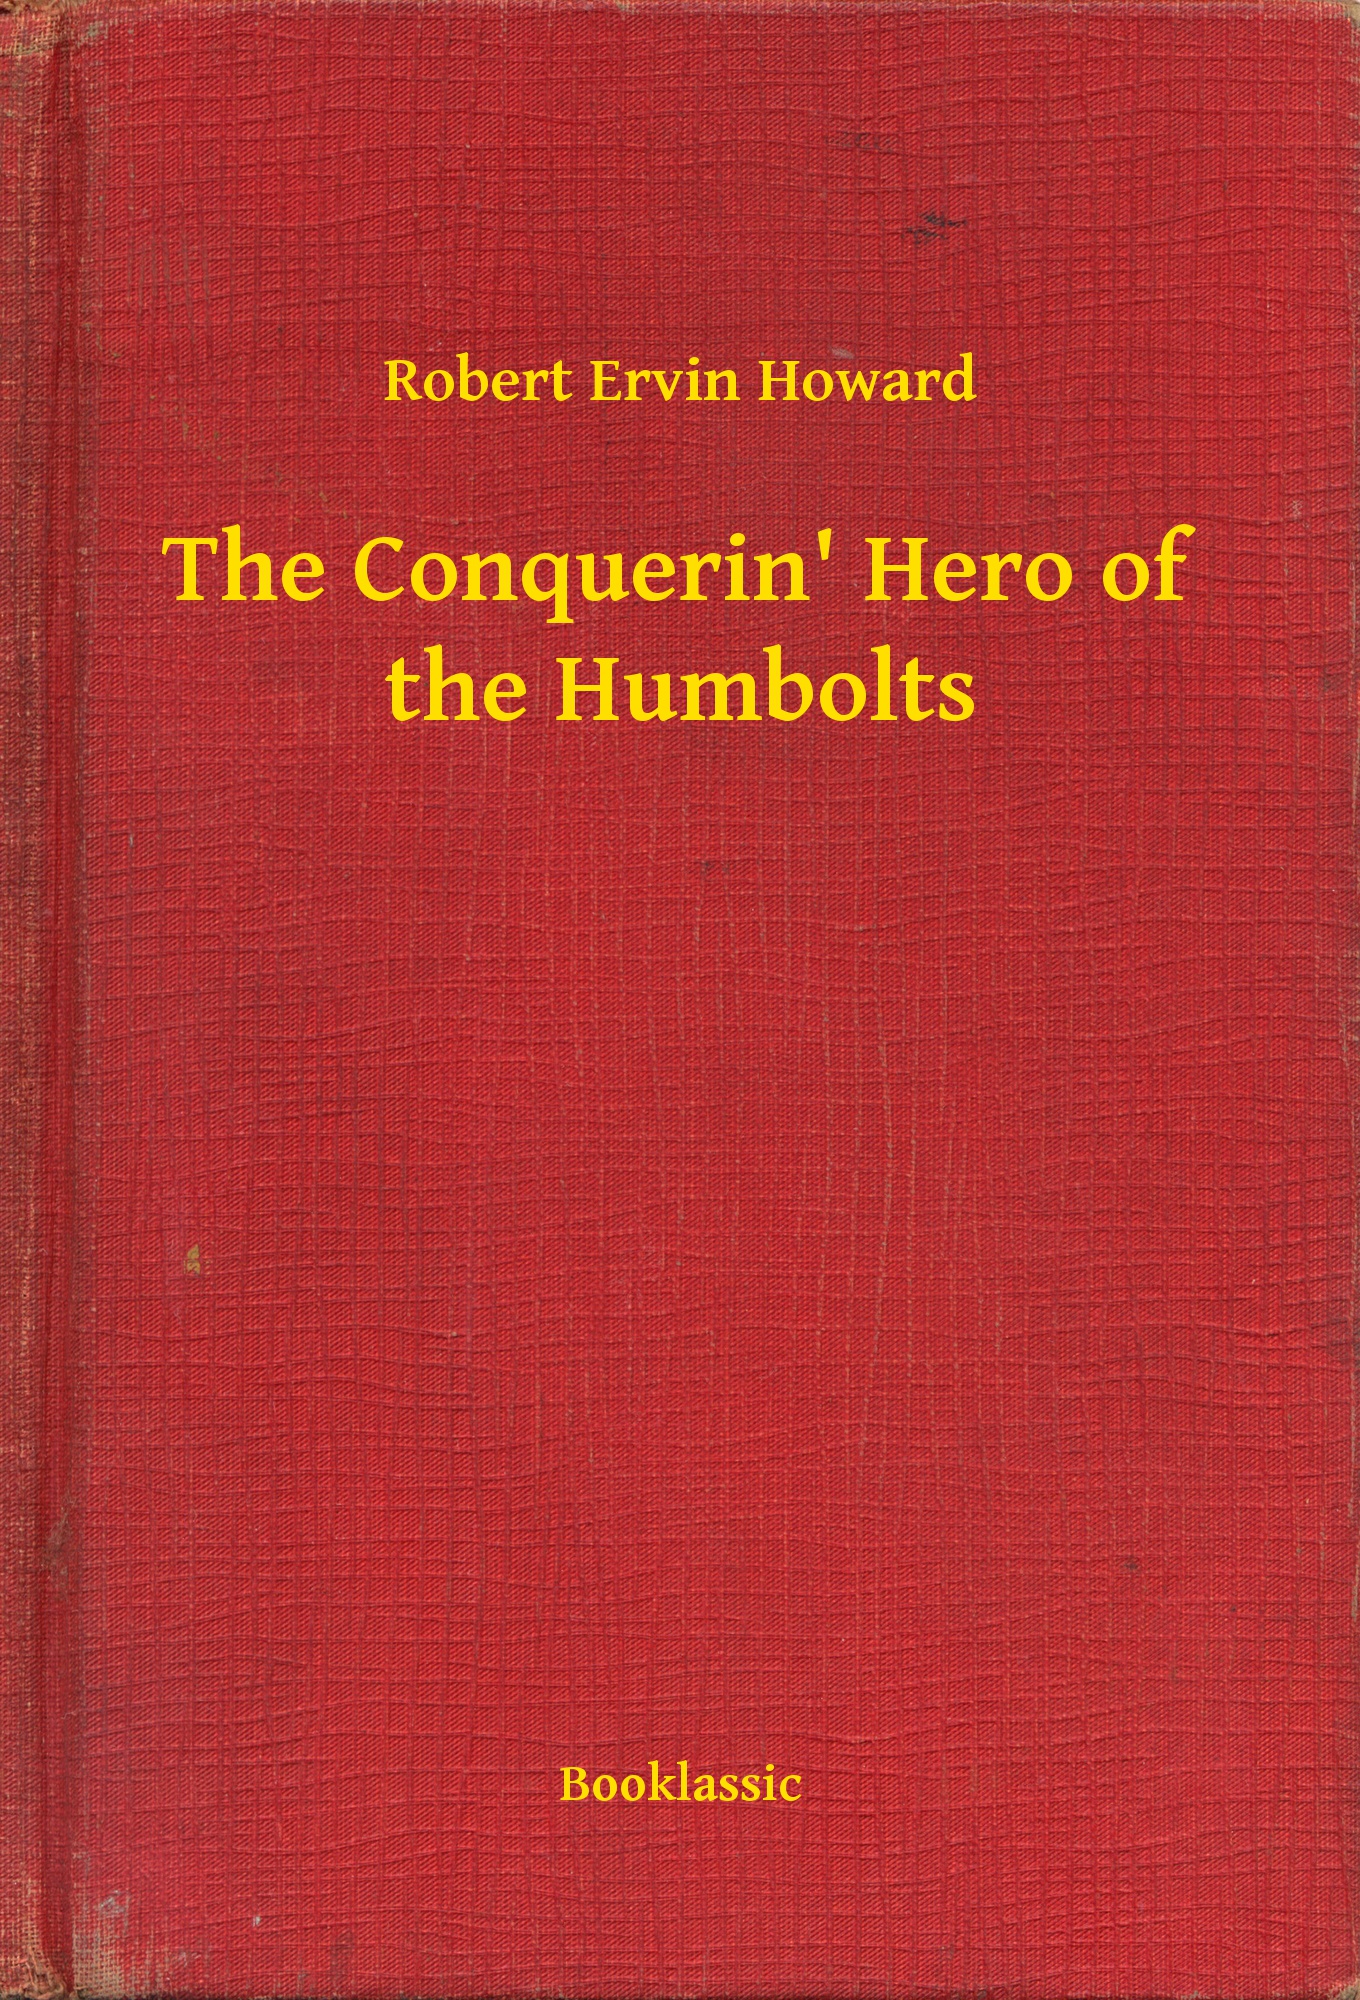 The Conquerin" Hero of the Humbolts